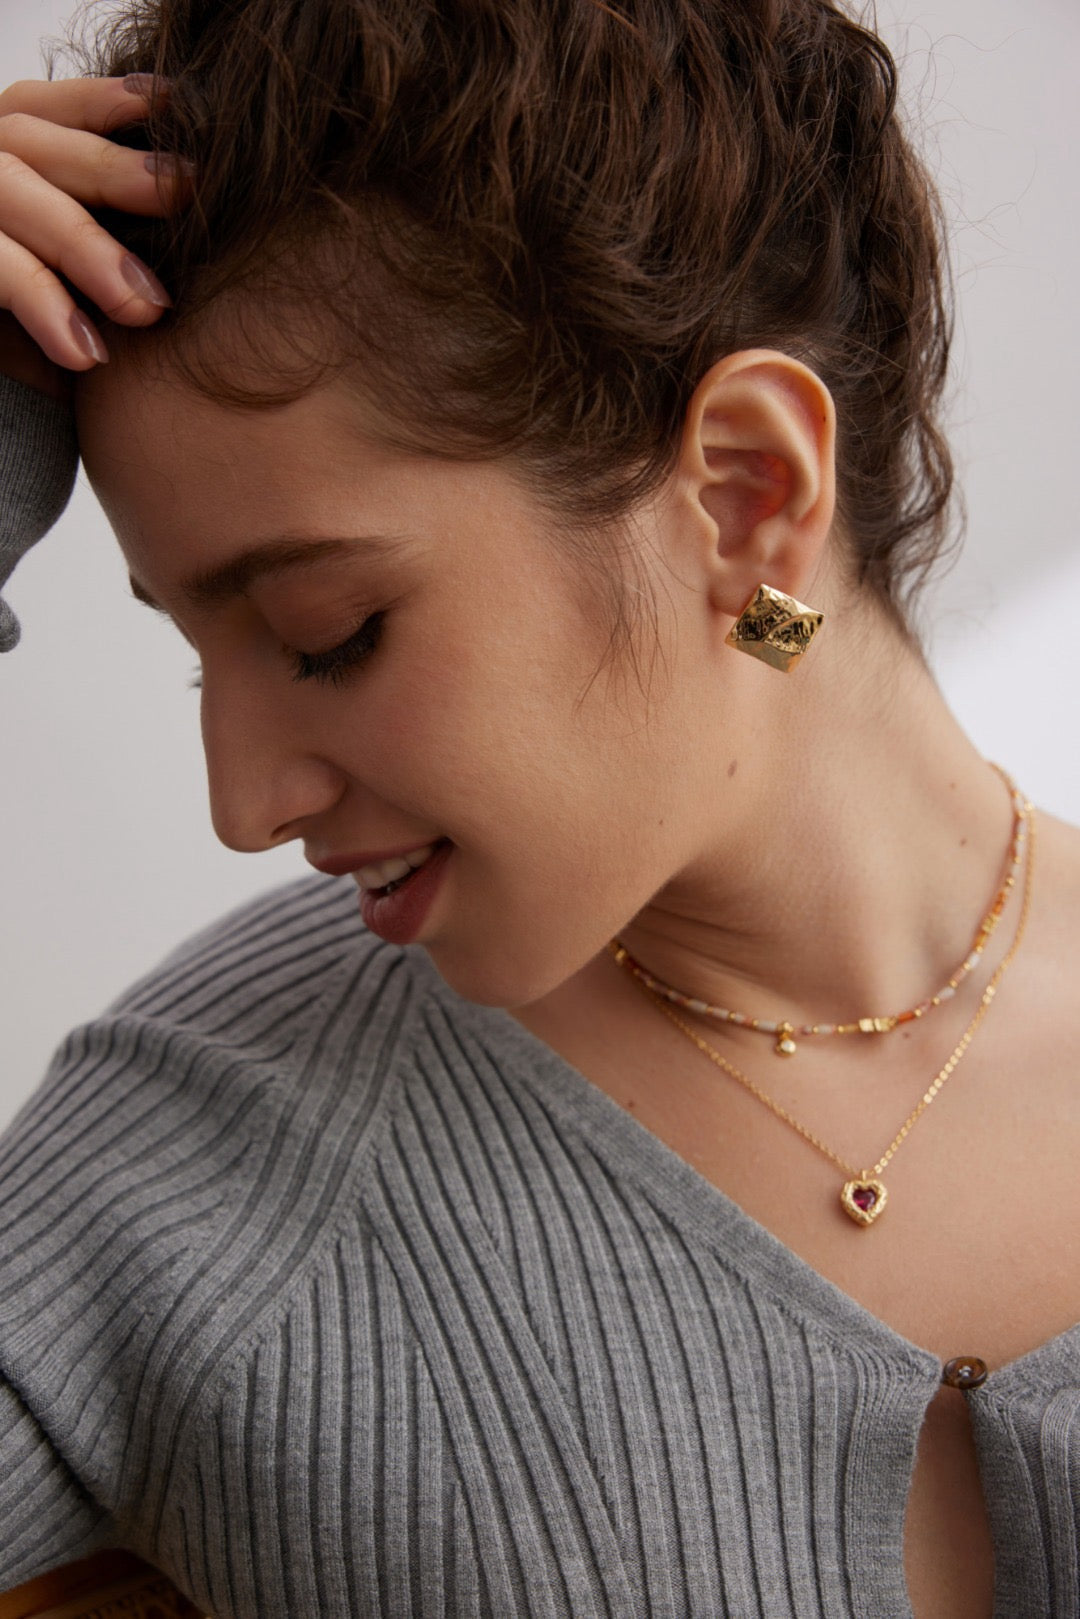 "Bestselling gold necklace from J'Adore Jewelry" "Top-selling diamond earrings from J'Adore Jewelry" "Popular minimalist bracelet from J'Adore Jewelry" "Elegant pearl pendant from J'Adore Jewelry" "Bestselling charm bracelet from J'Adore Jewelry" "Top